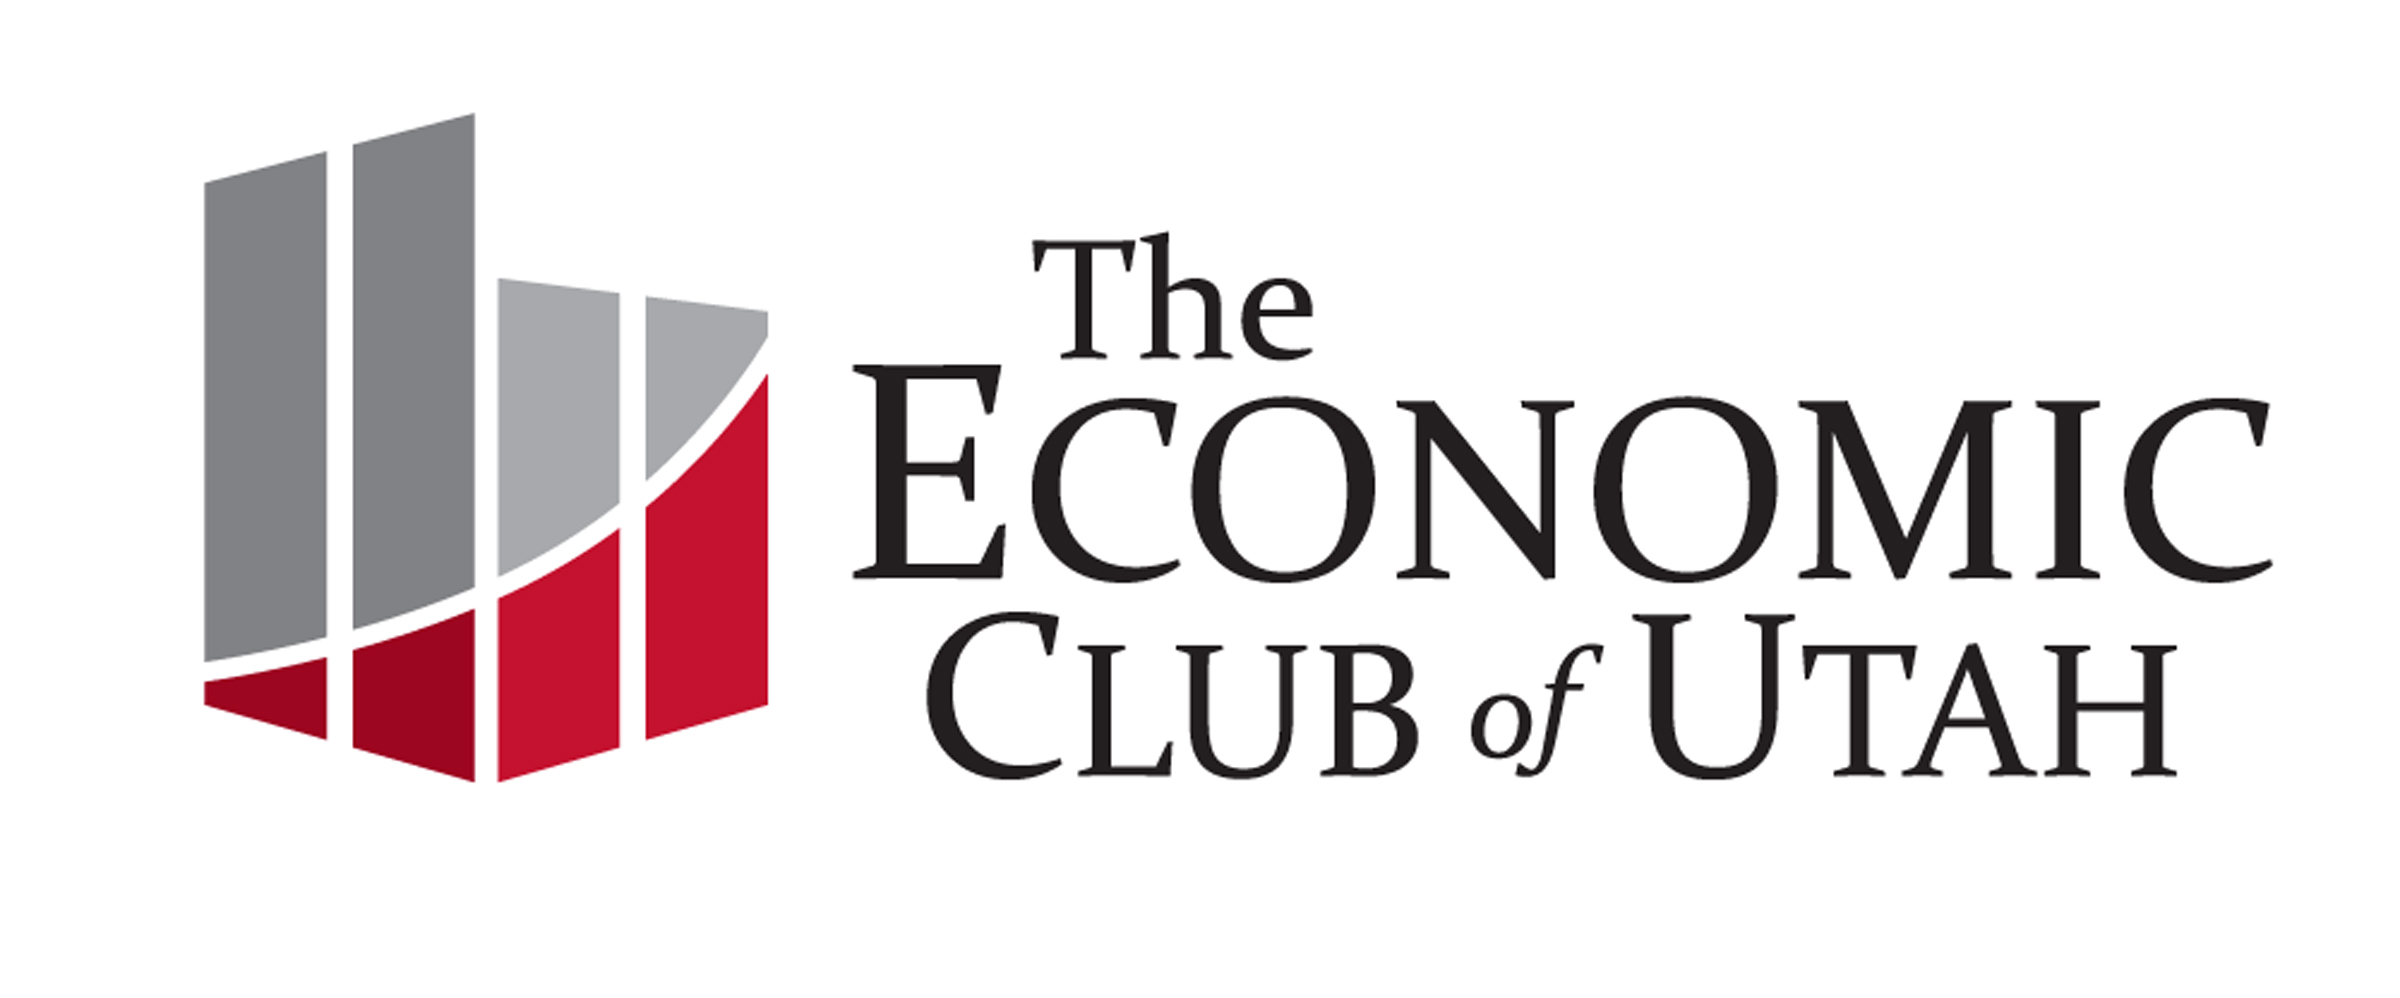 The Economic Club of Utah will provide a forum to share research, data and analysis important to the success of the economy.